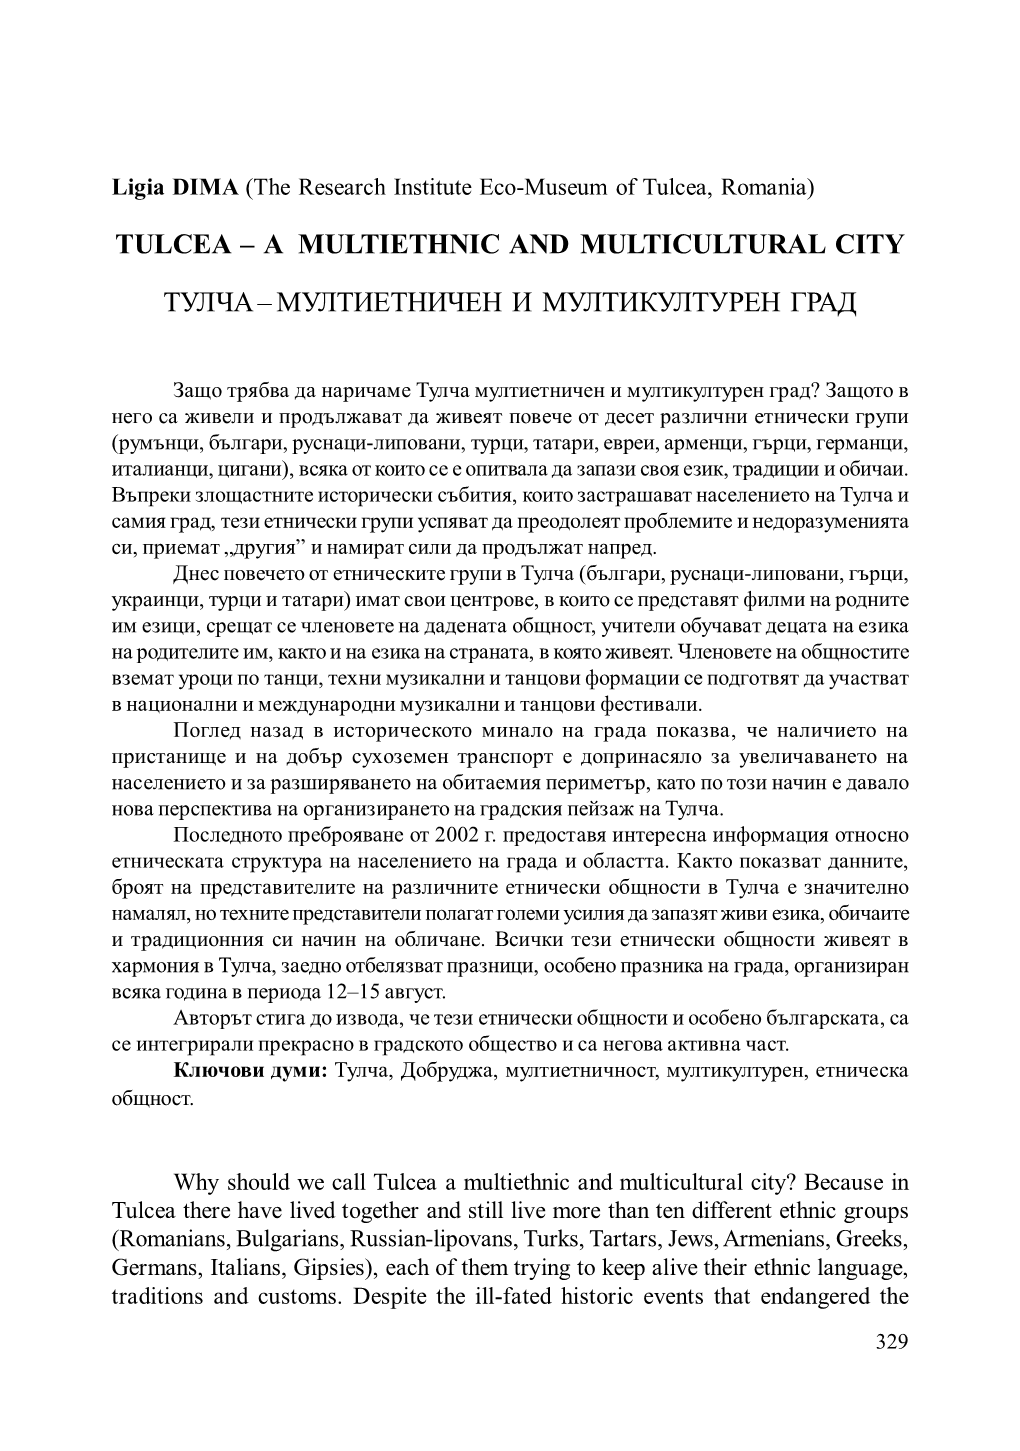 Tulcea – a Multiethnic and Multicultural City Тулча